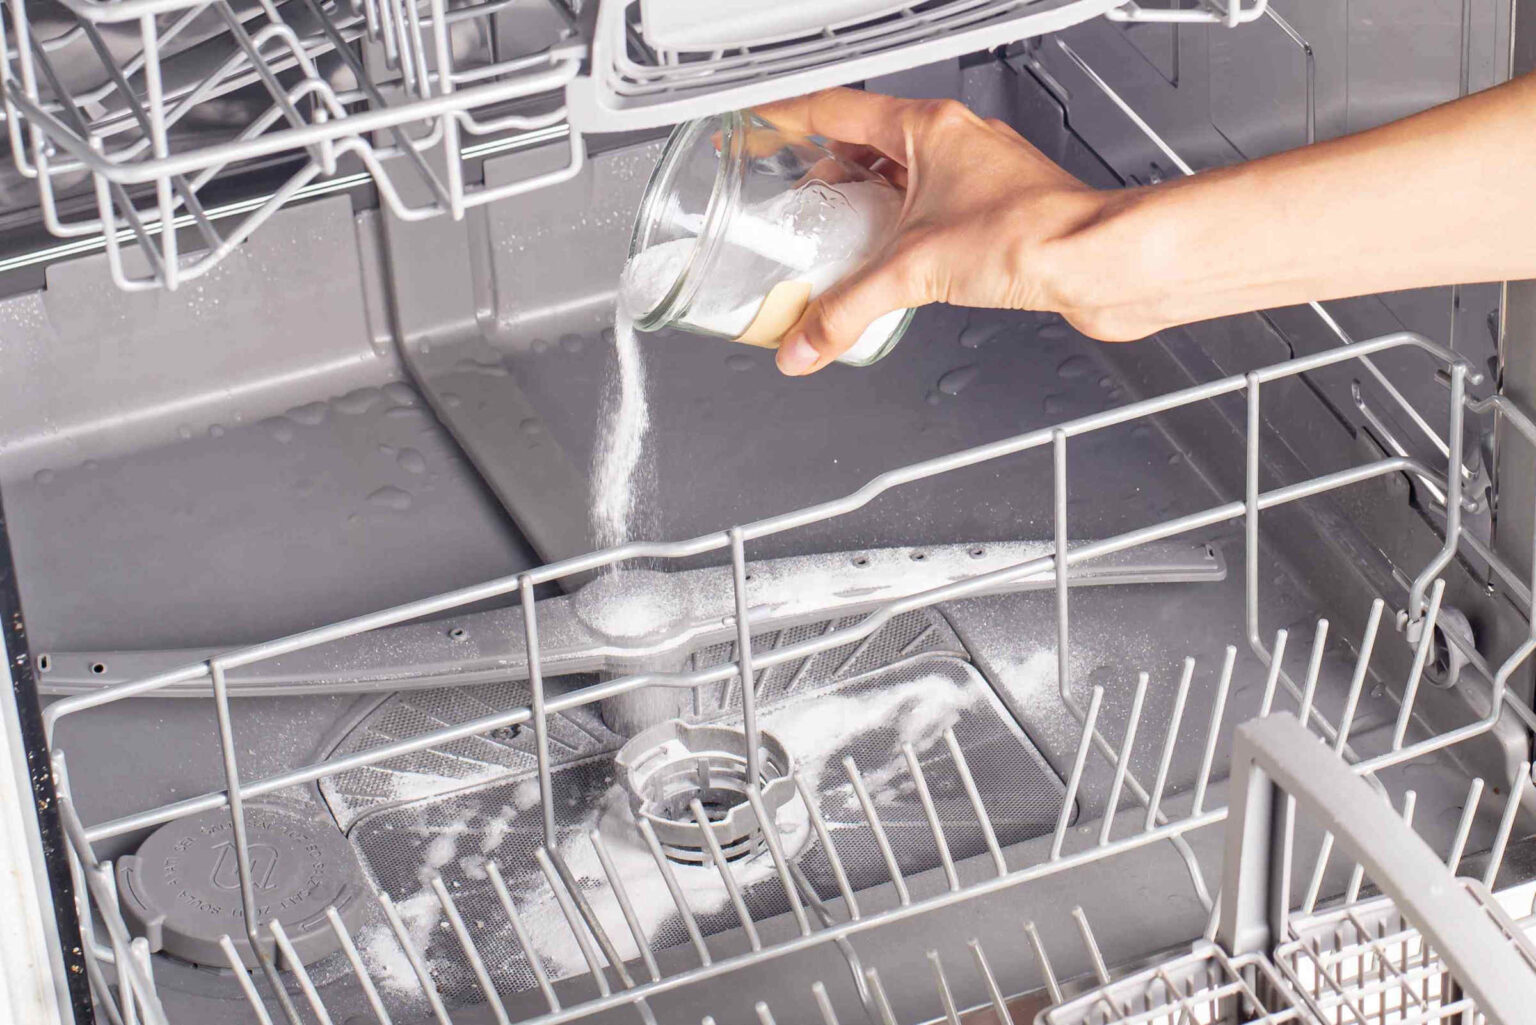 Even though your dishwasher is a cleaning tool, it still needs its own maintenance. Here's how to manage the regular upkeep of your favorite device!